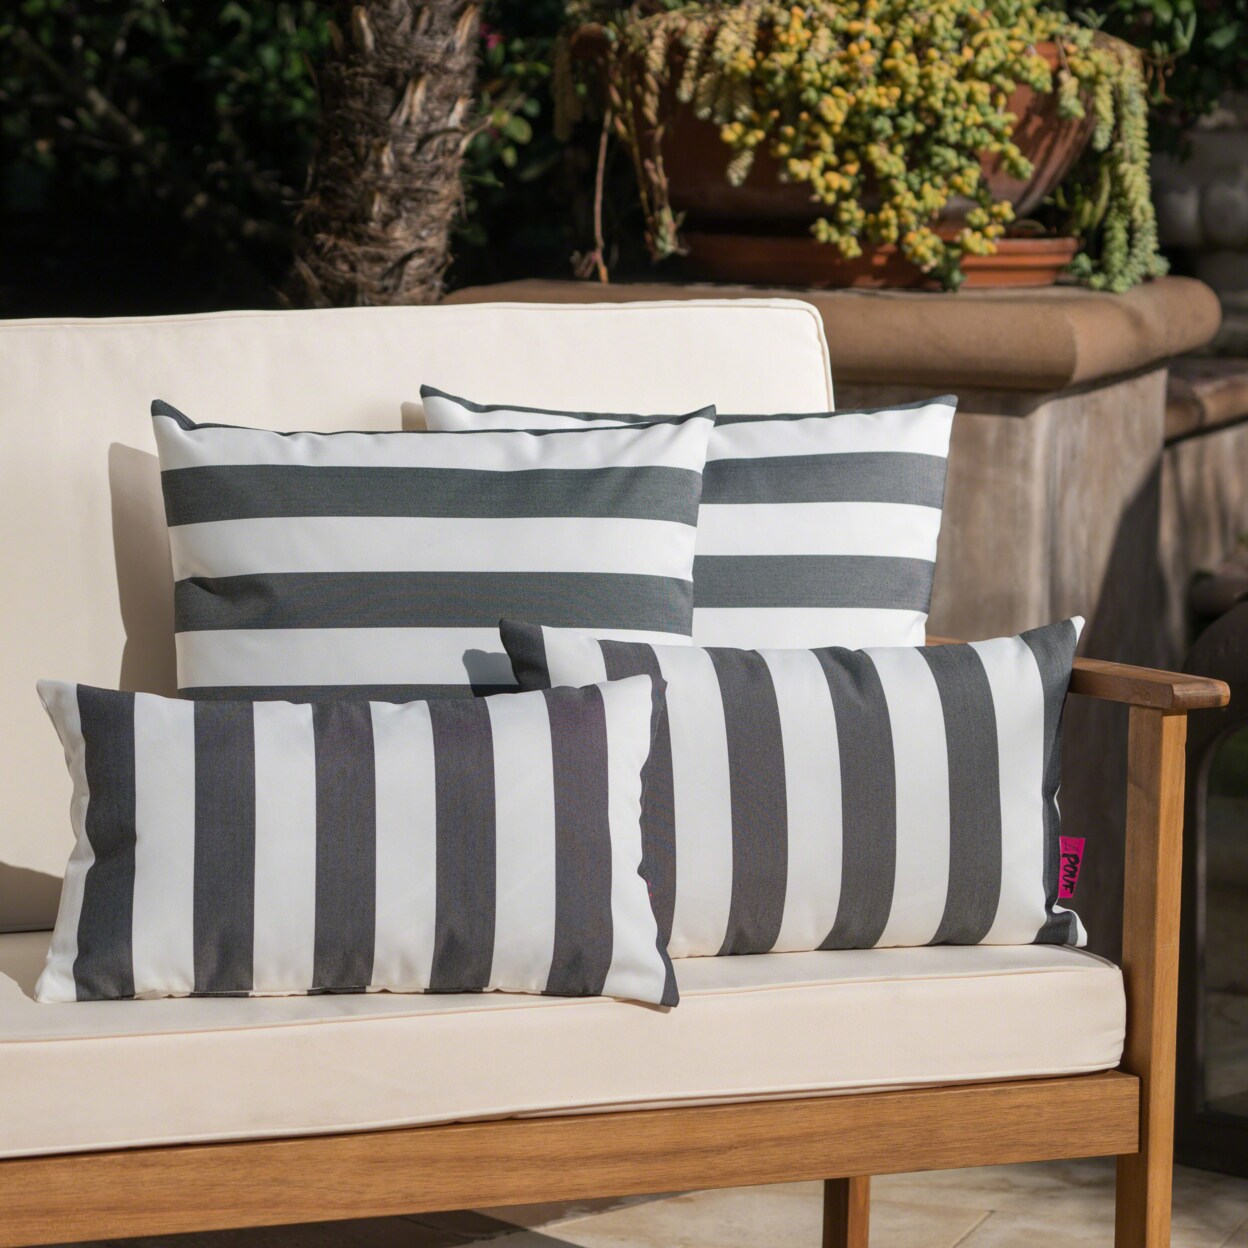 La Jolla Outdoor Water Resistant Square and Rectangular Throw Pillows - Set  of 4 Brown/White, 1 unit - Ralphs